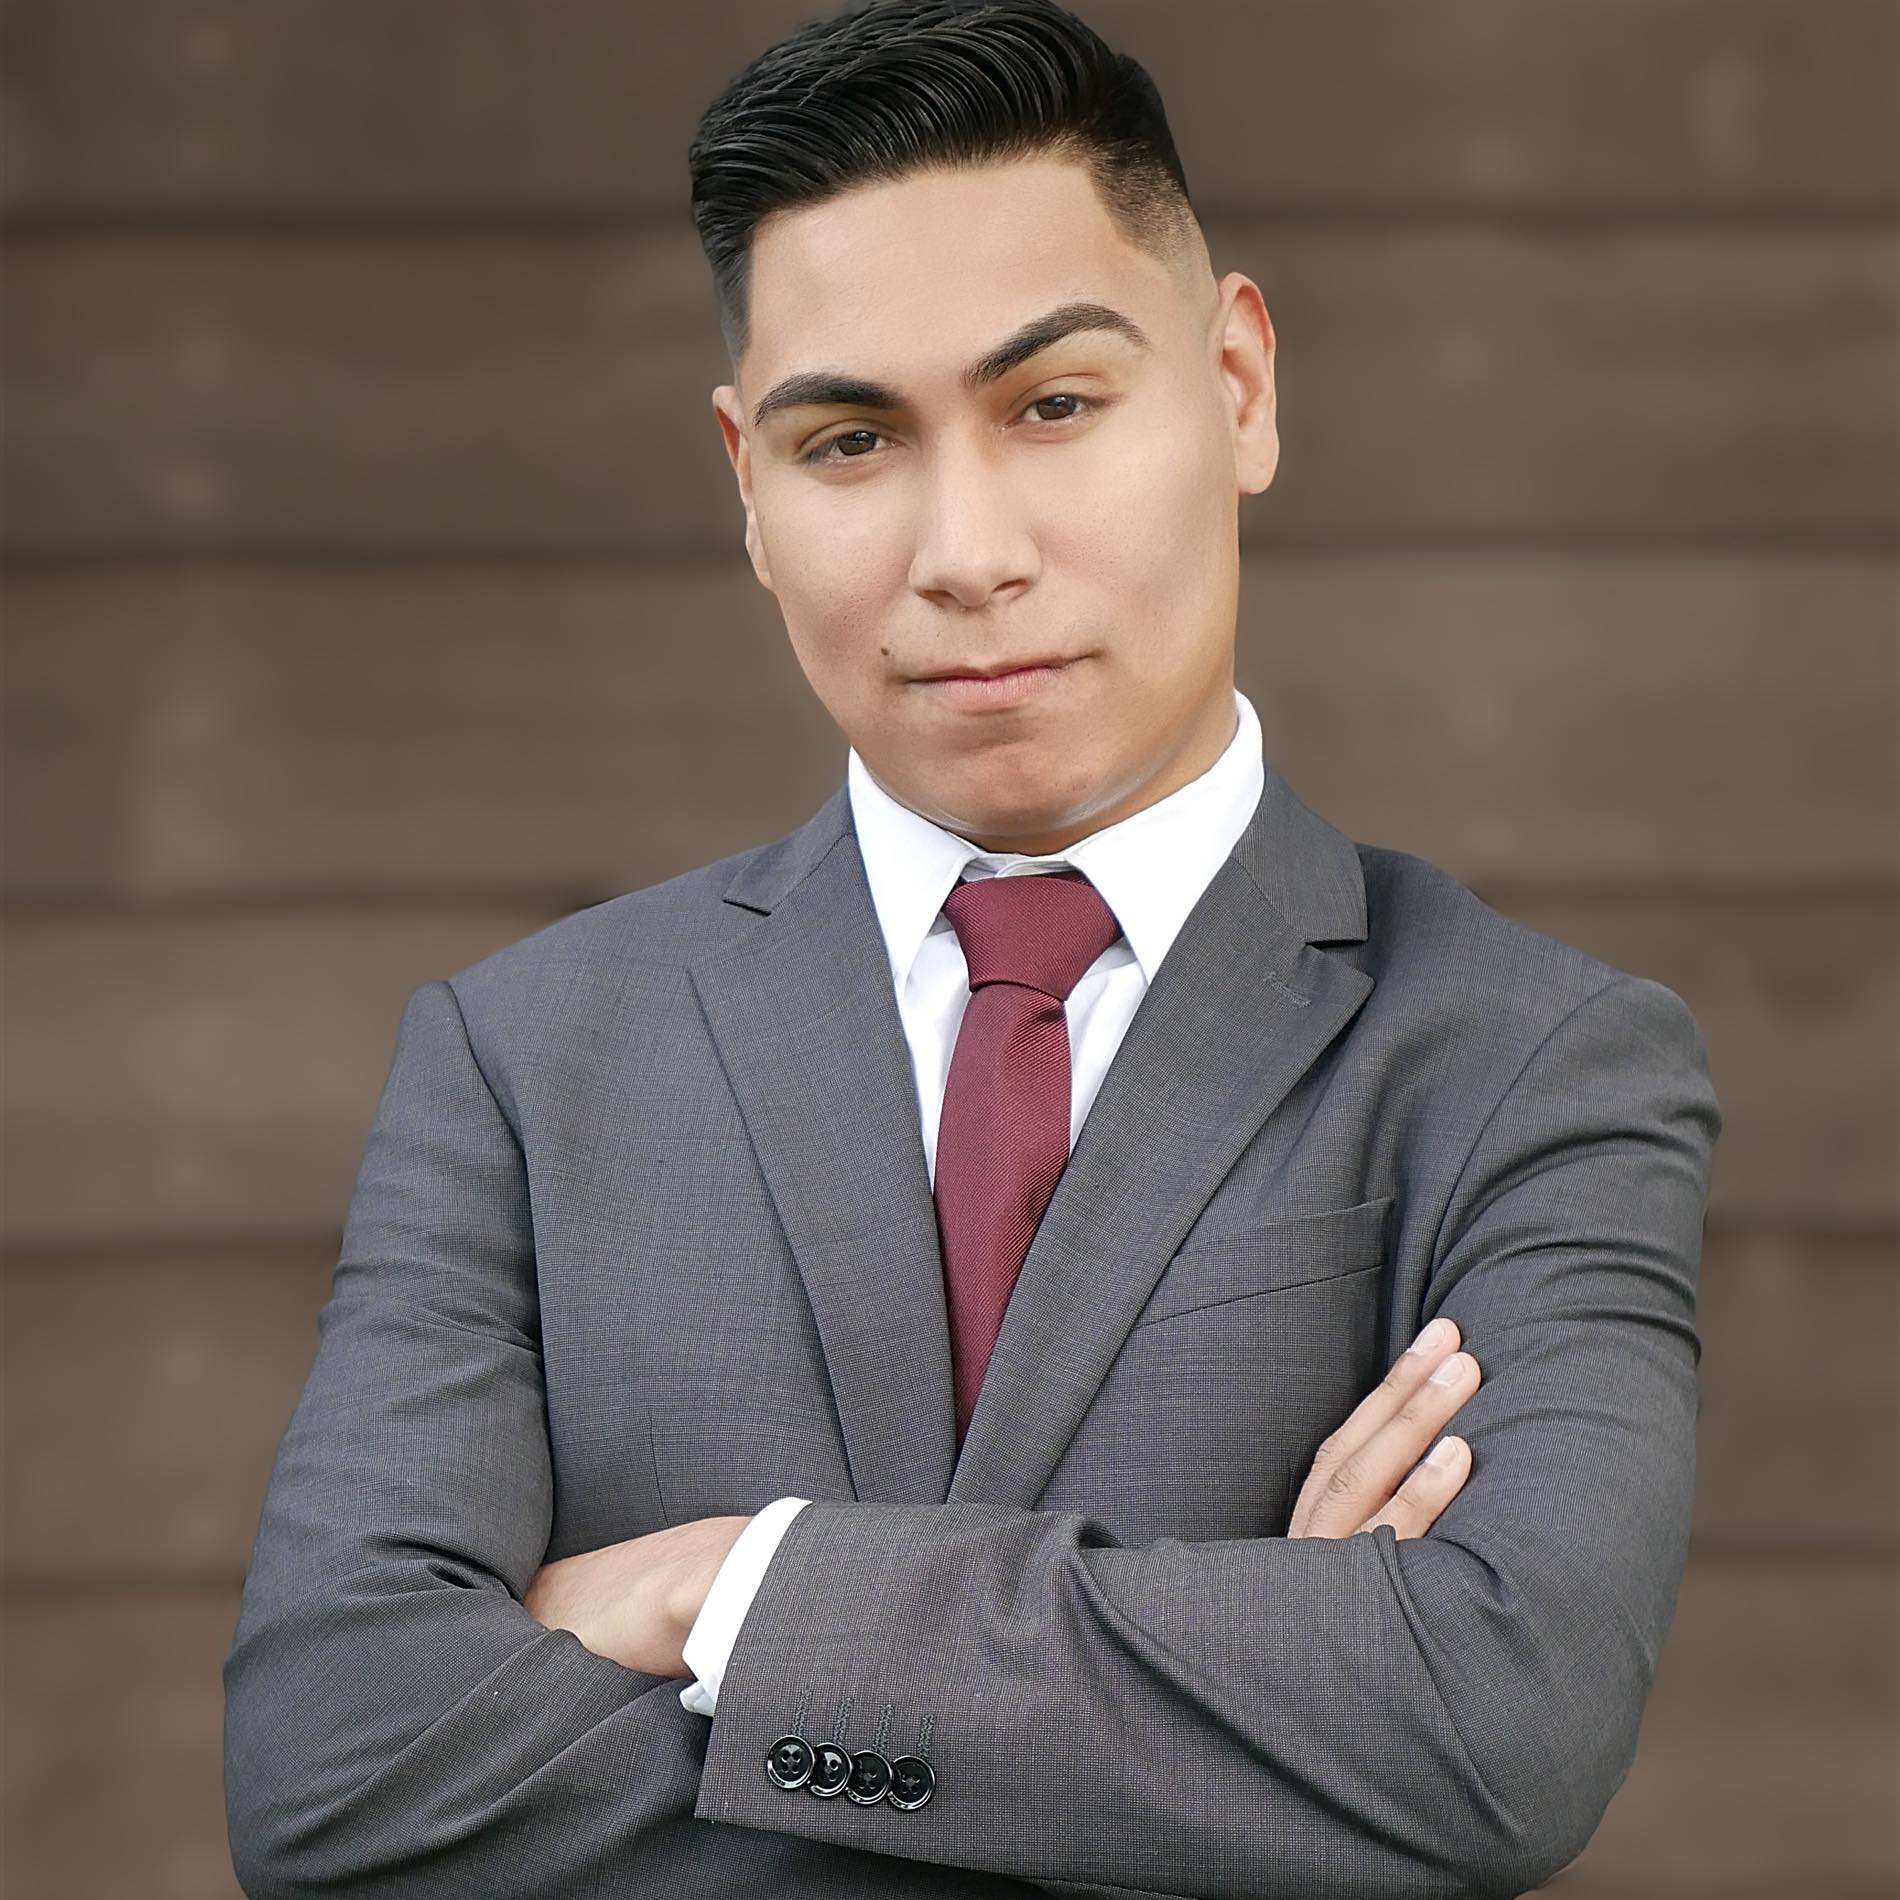 Picture of Danny Avitia with arms folded in a grey business jacket and maroon tie with white collared shirt against a blurred building wall